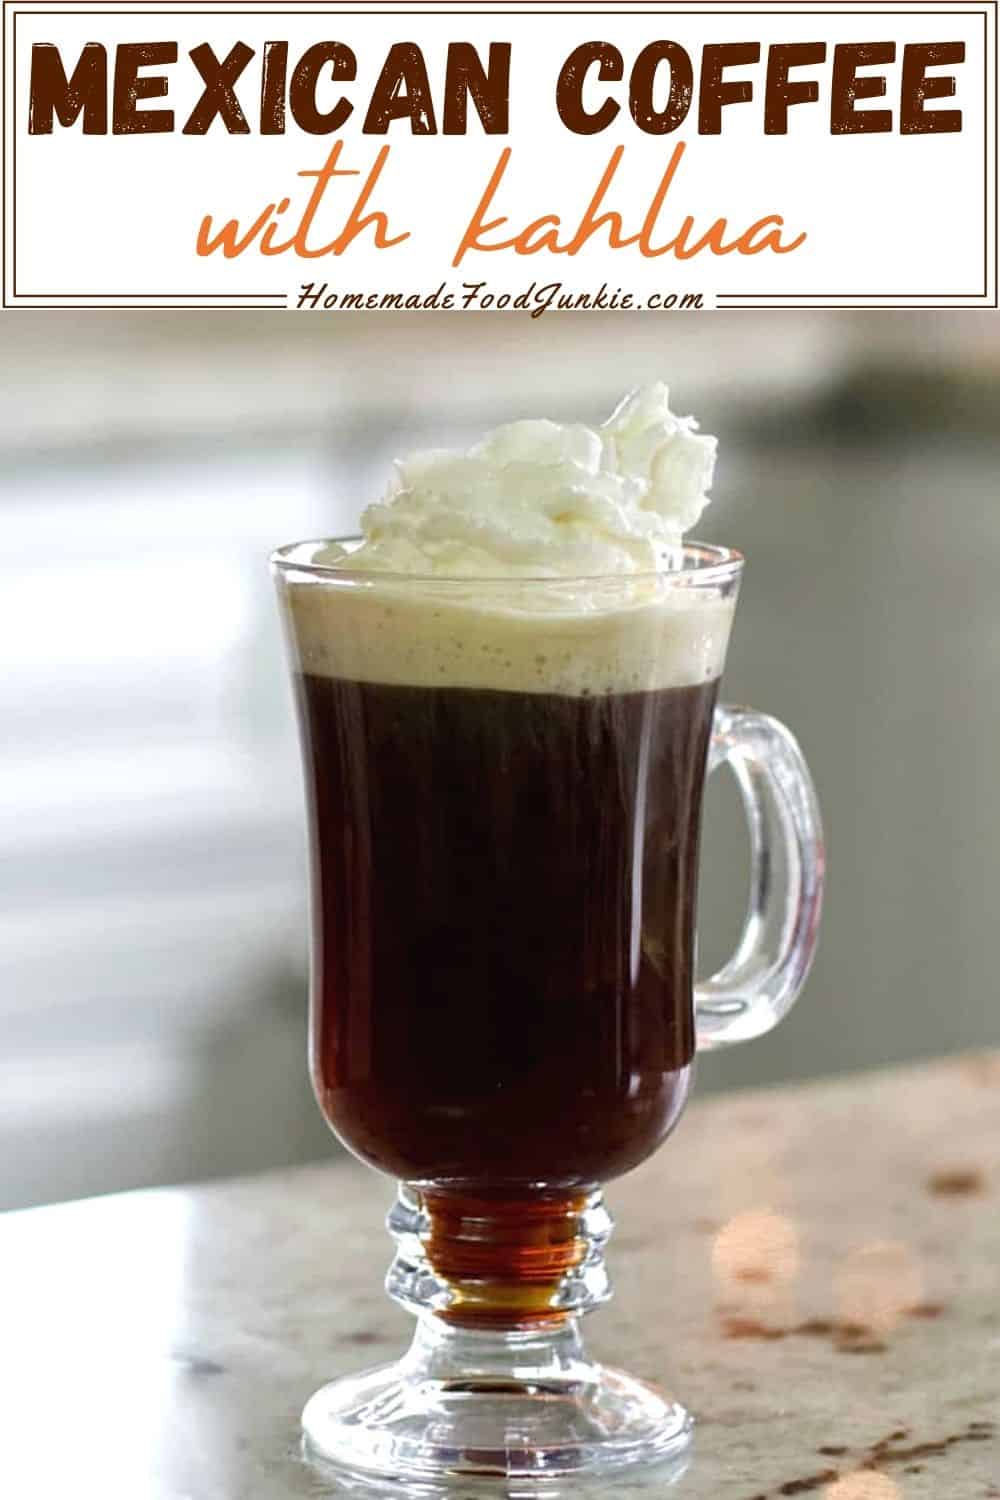 Mexican Coffee Drink Recipe with Kahlua | Homemade Food Junkie